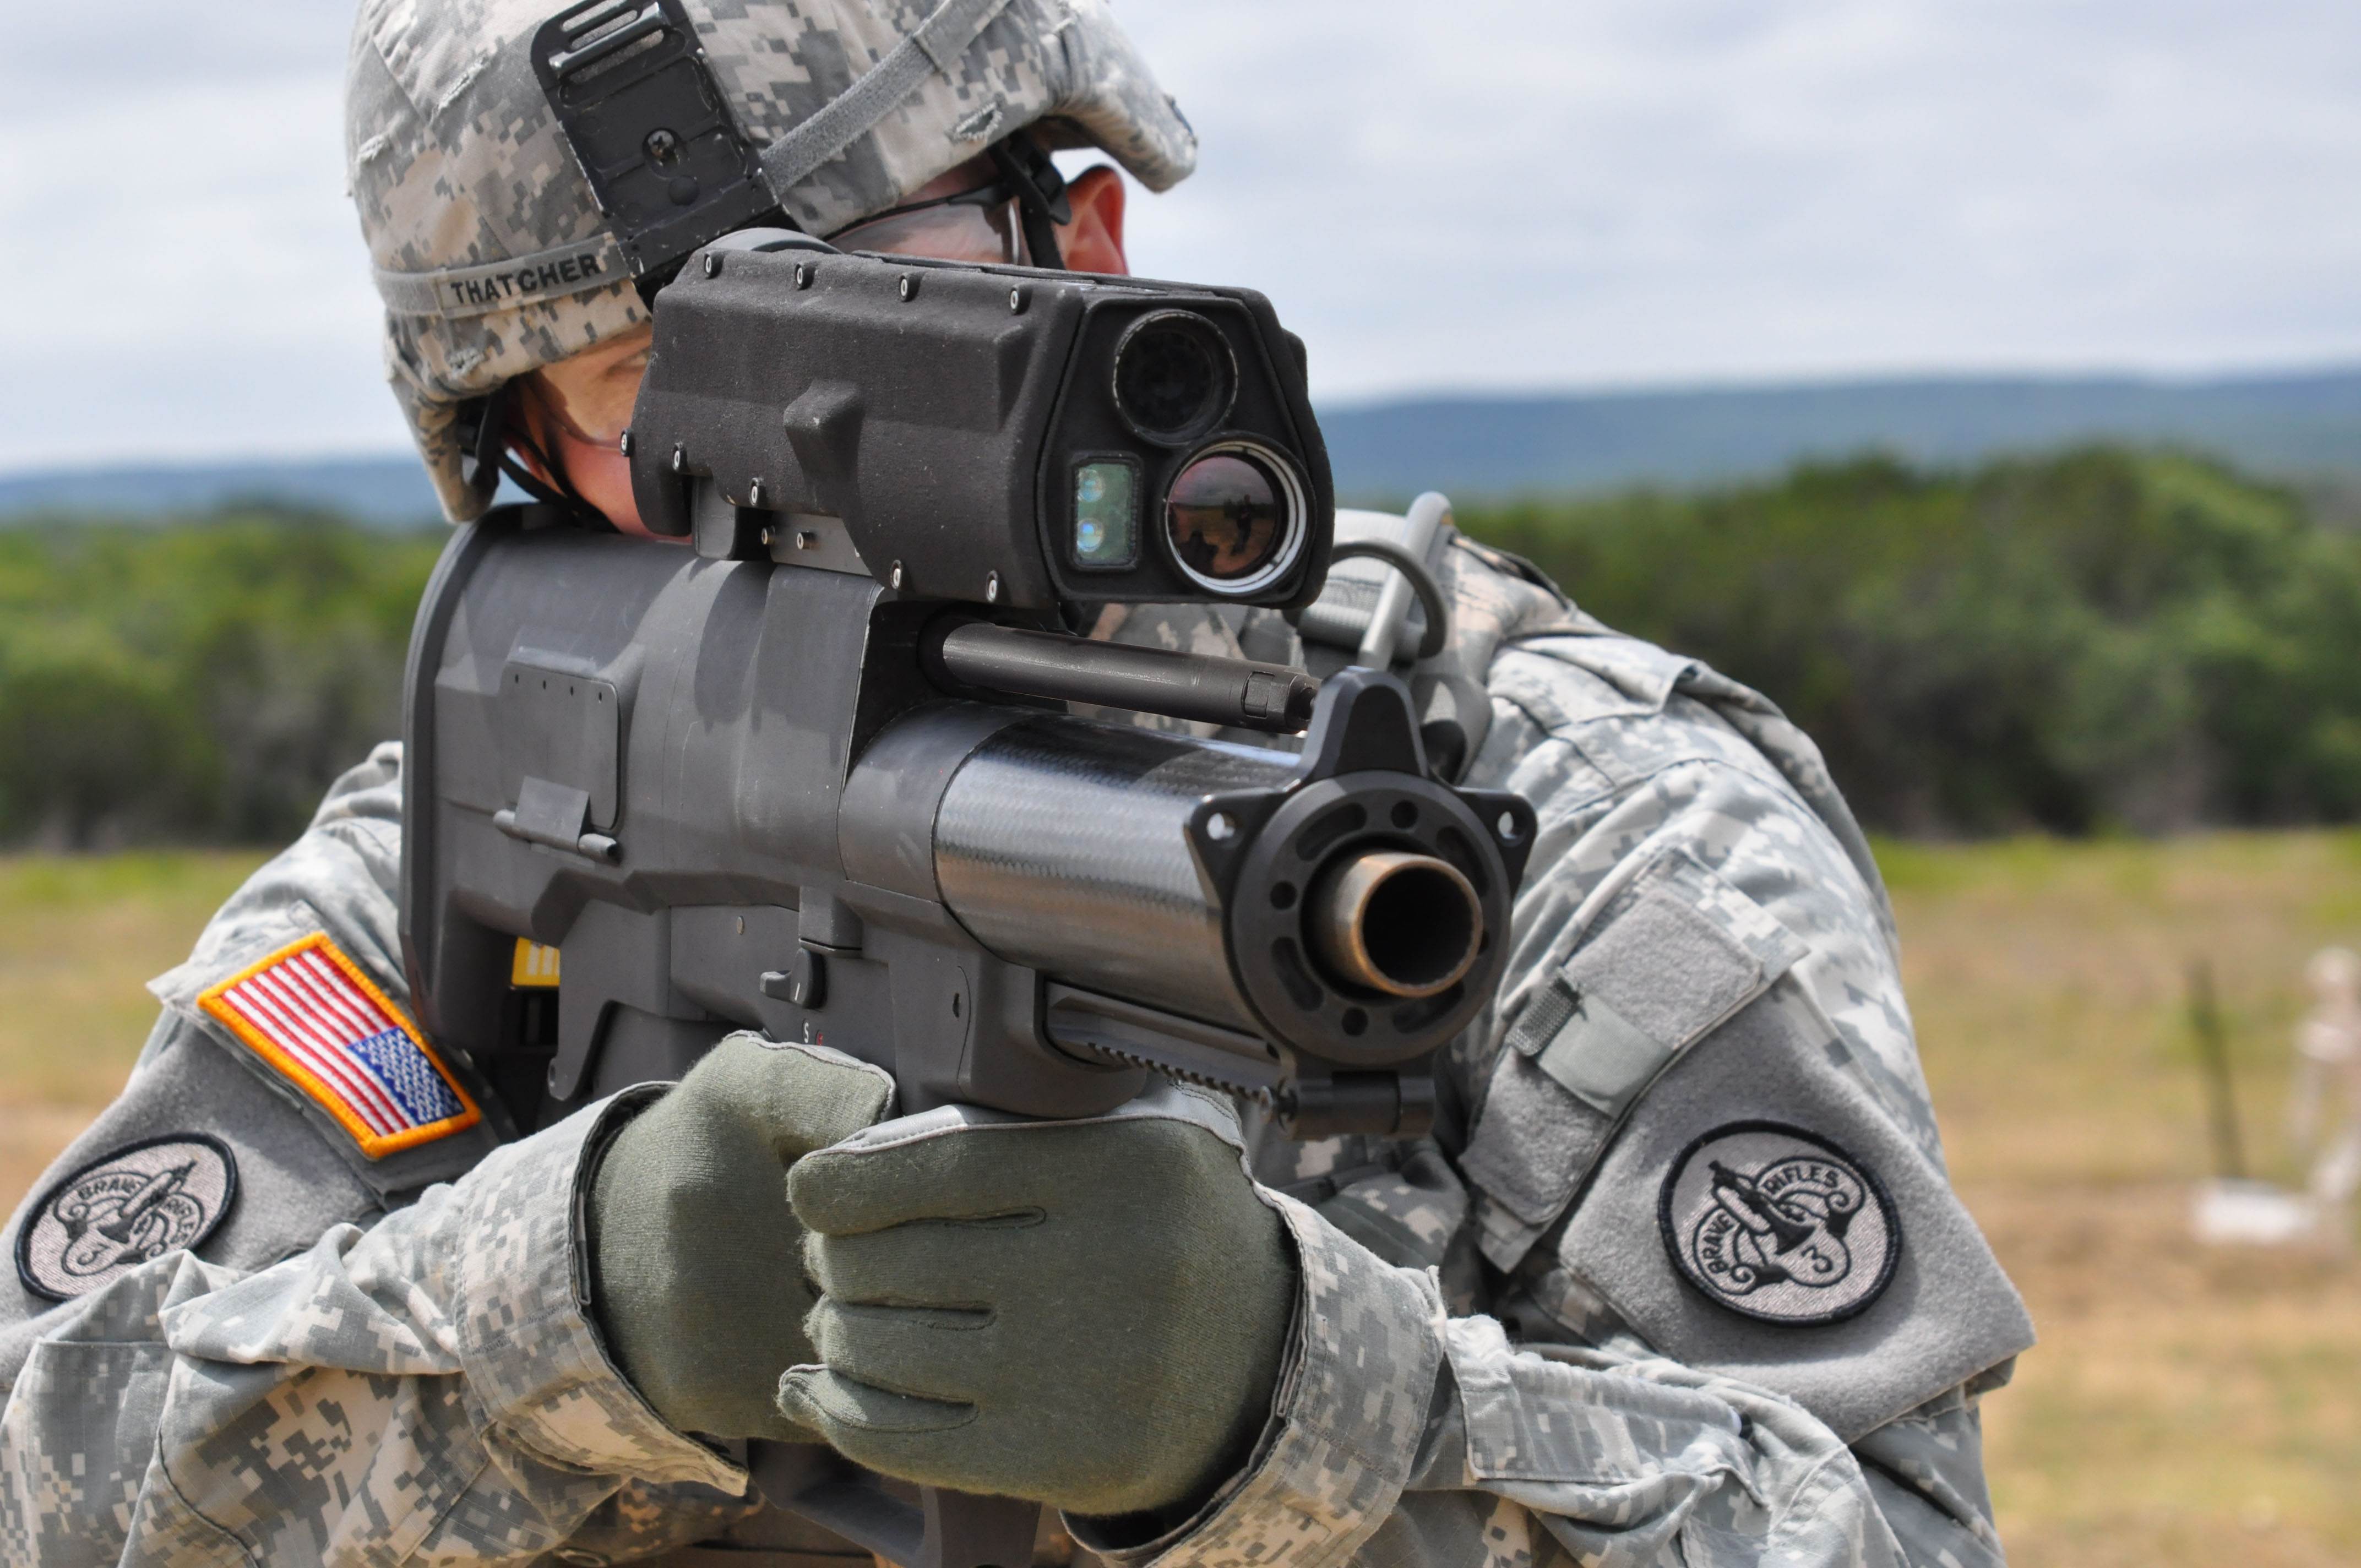 The US Army’s XM25 25mm Counter Defilade Target Engagement system